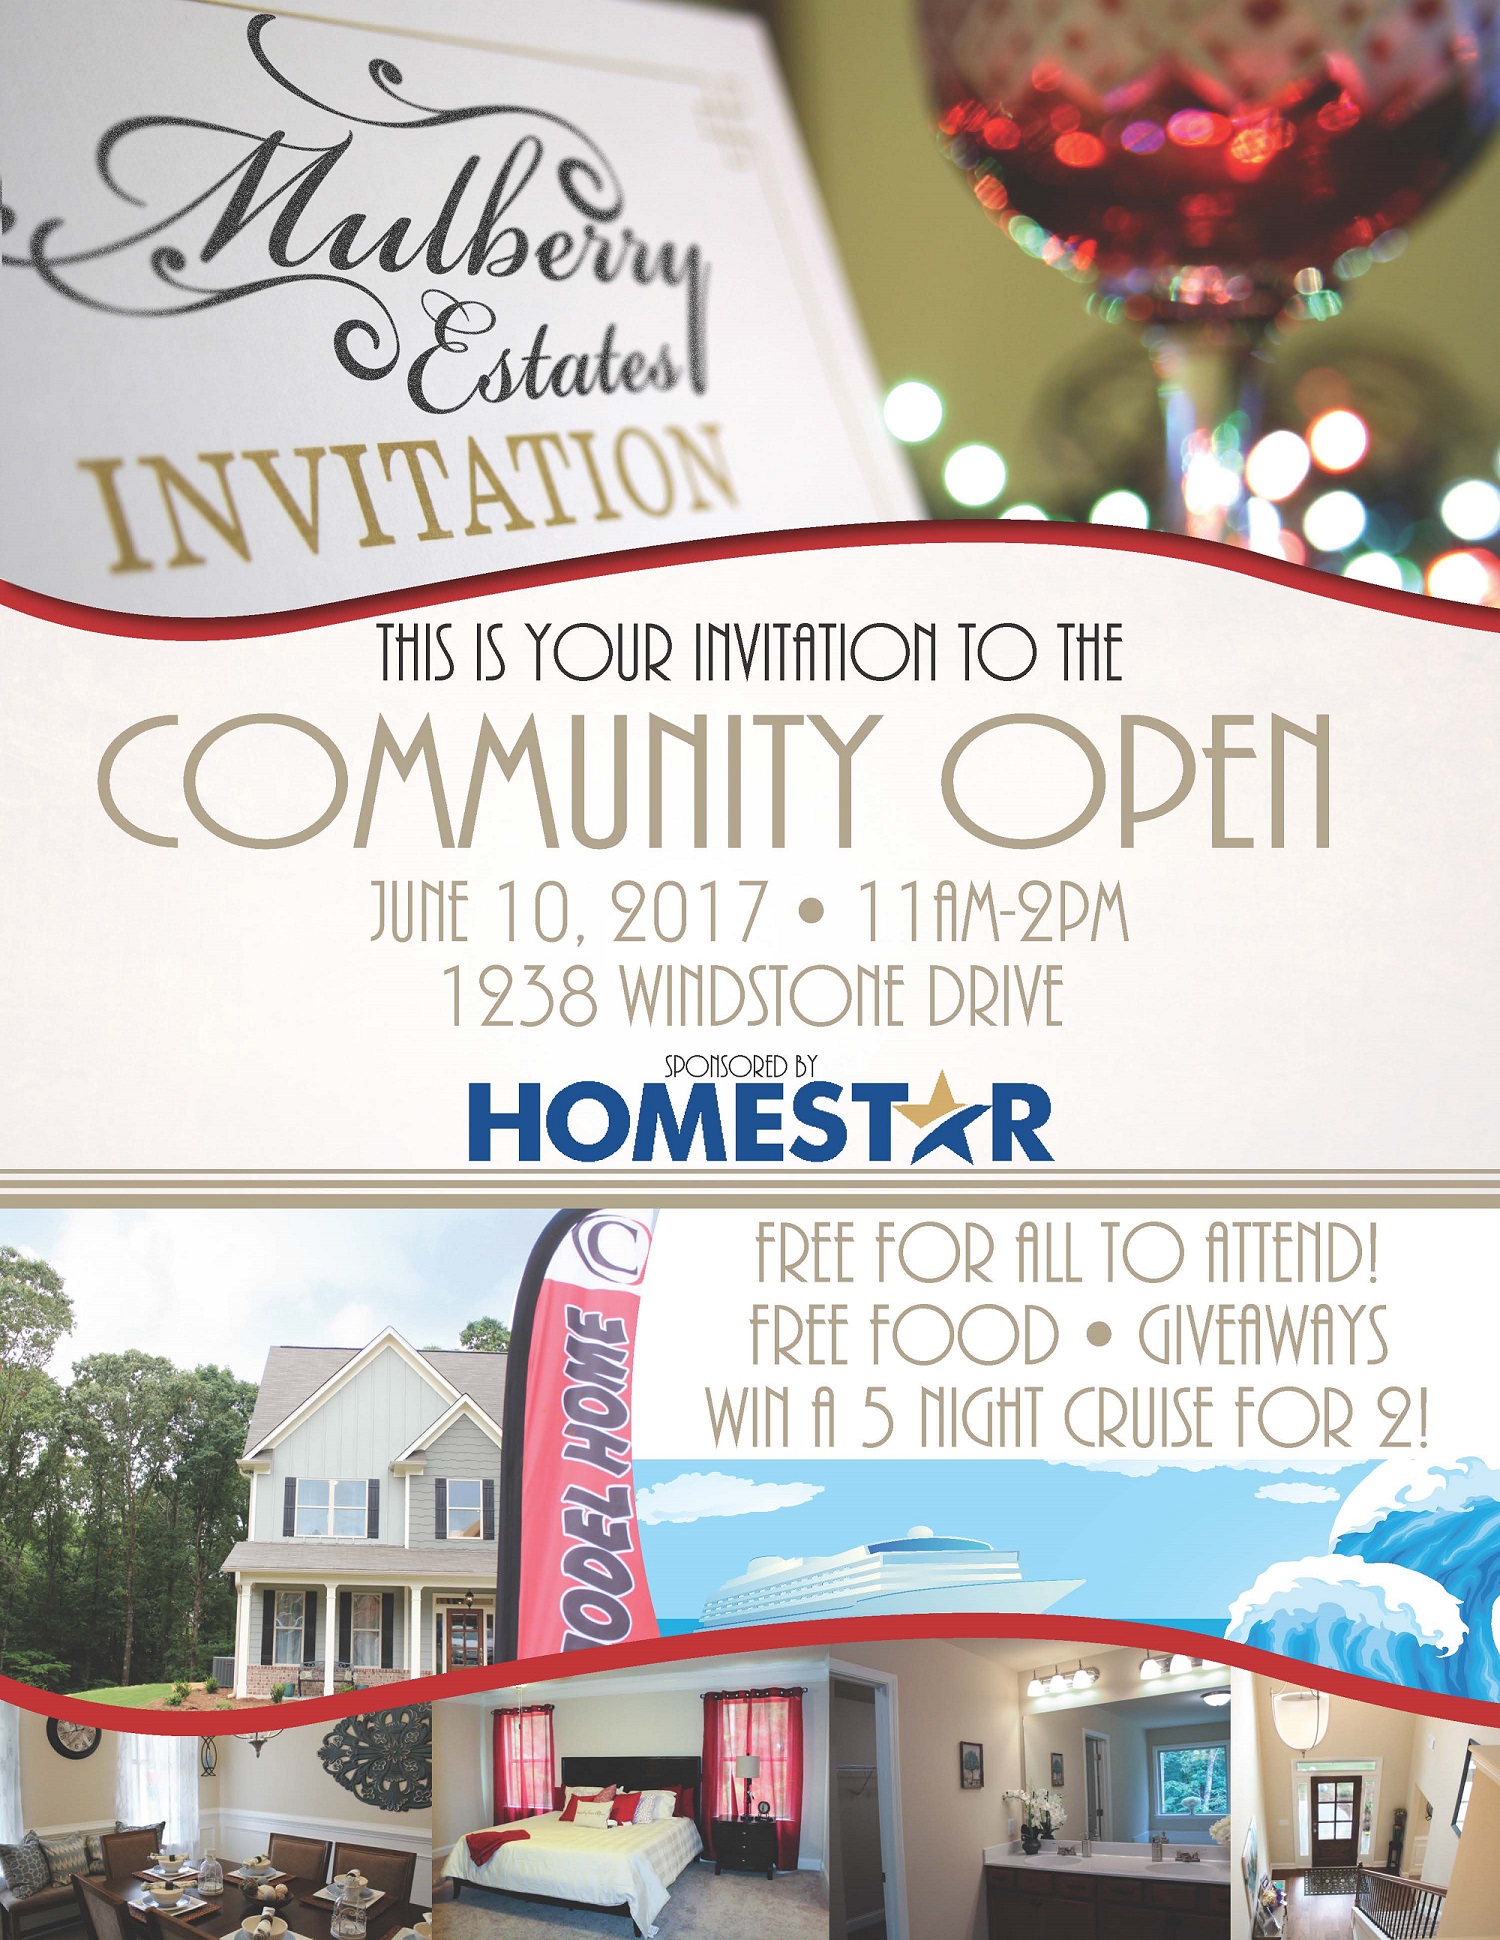 Mulberry Estates Community Open House Information